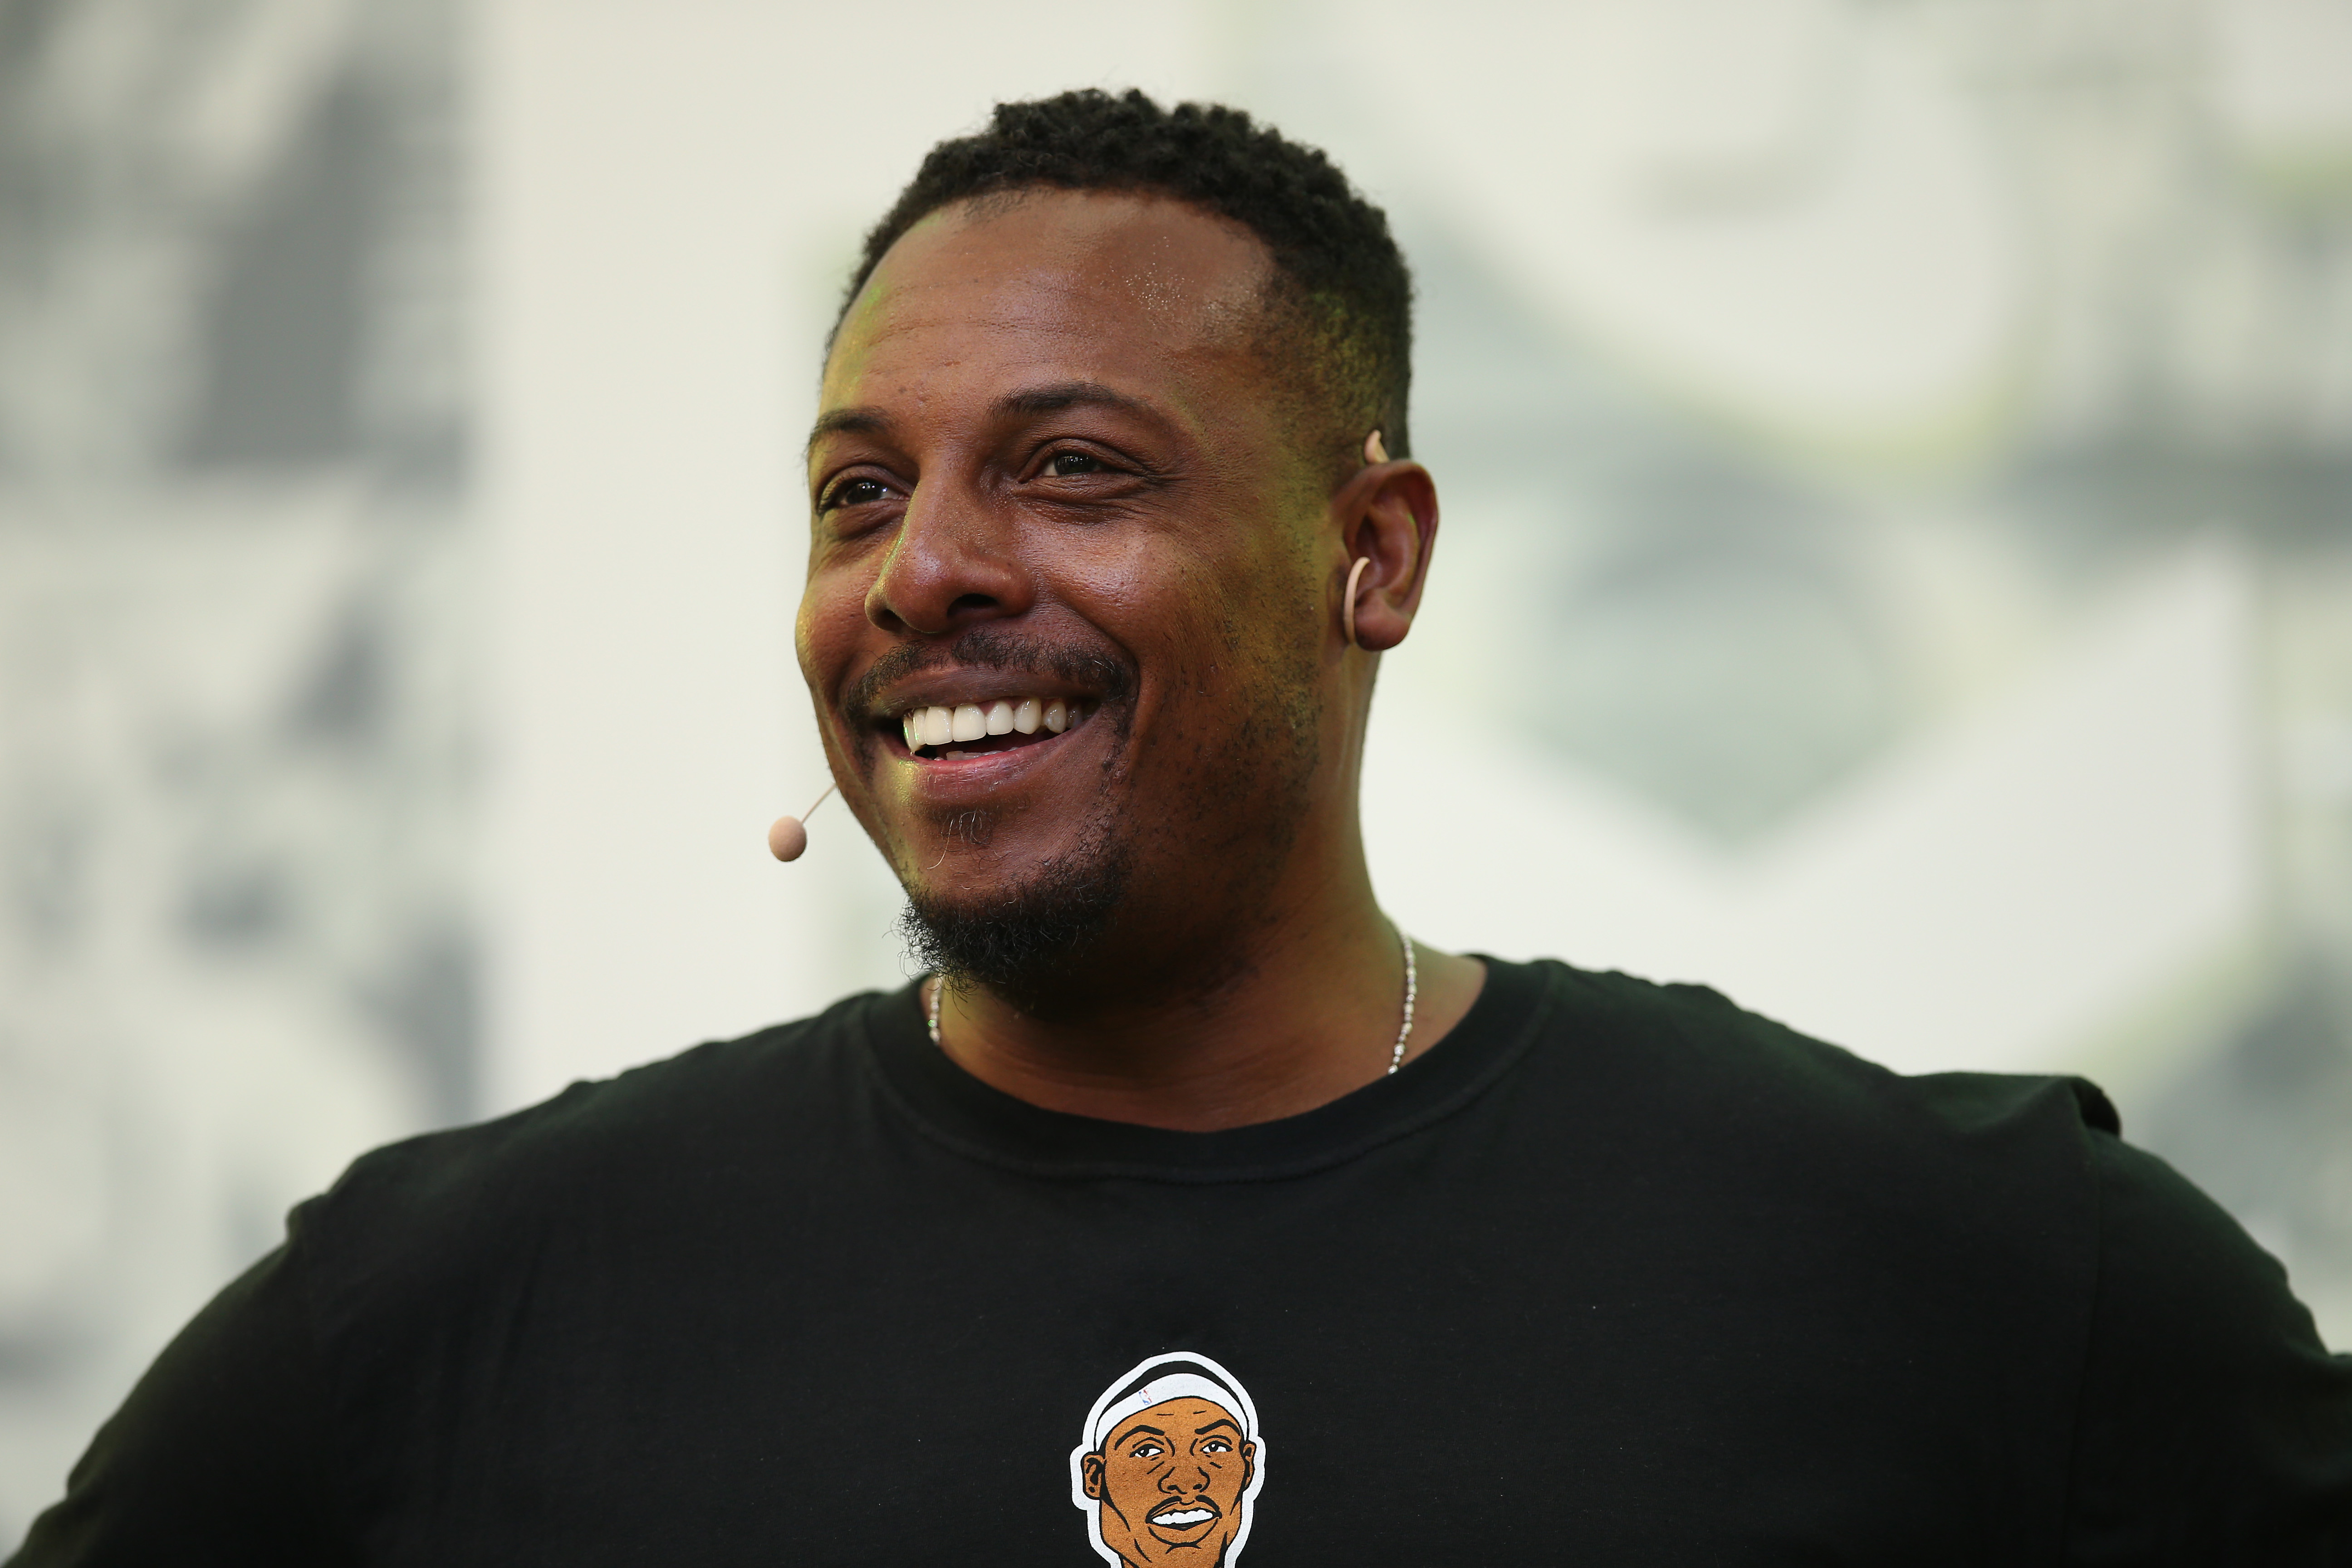 NBA legend Paul Pierce speaks during the NRL Grand Final Media Opportunity at Martin Place on Oct. 4, 2019, in Sydney, Australia. (Jason McCawley/Getty Images)